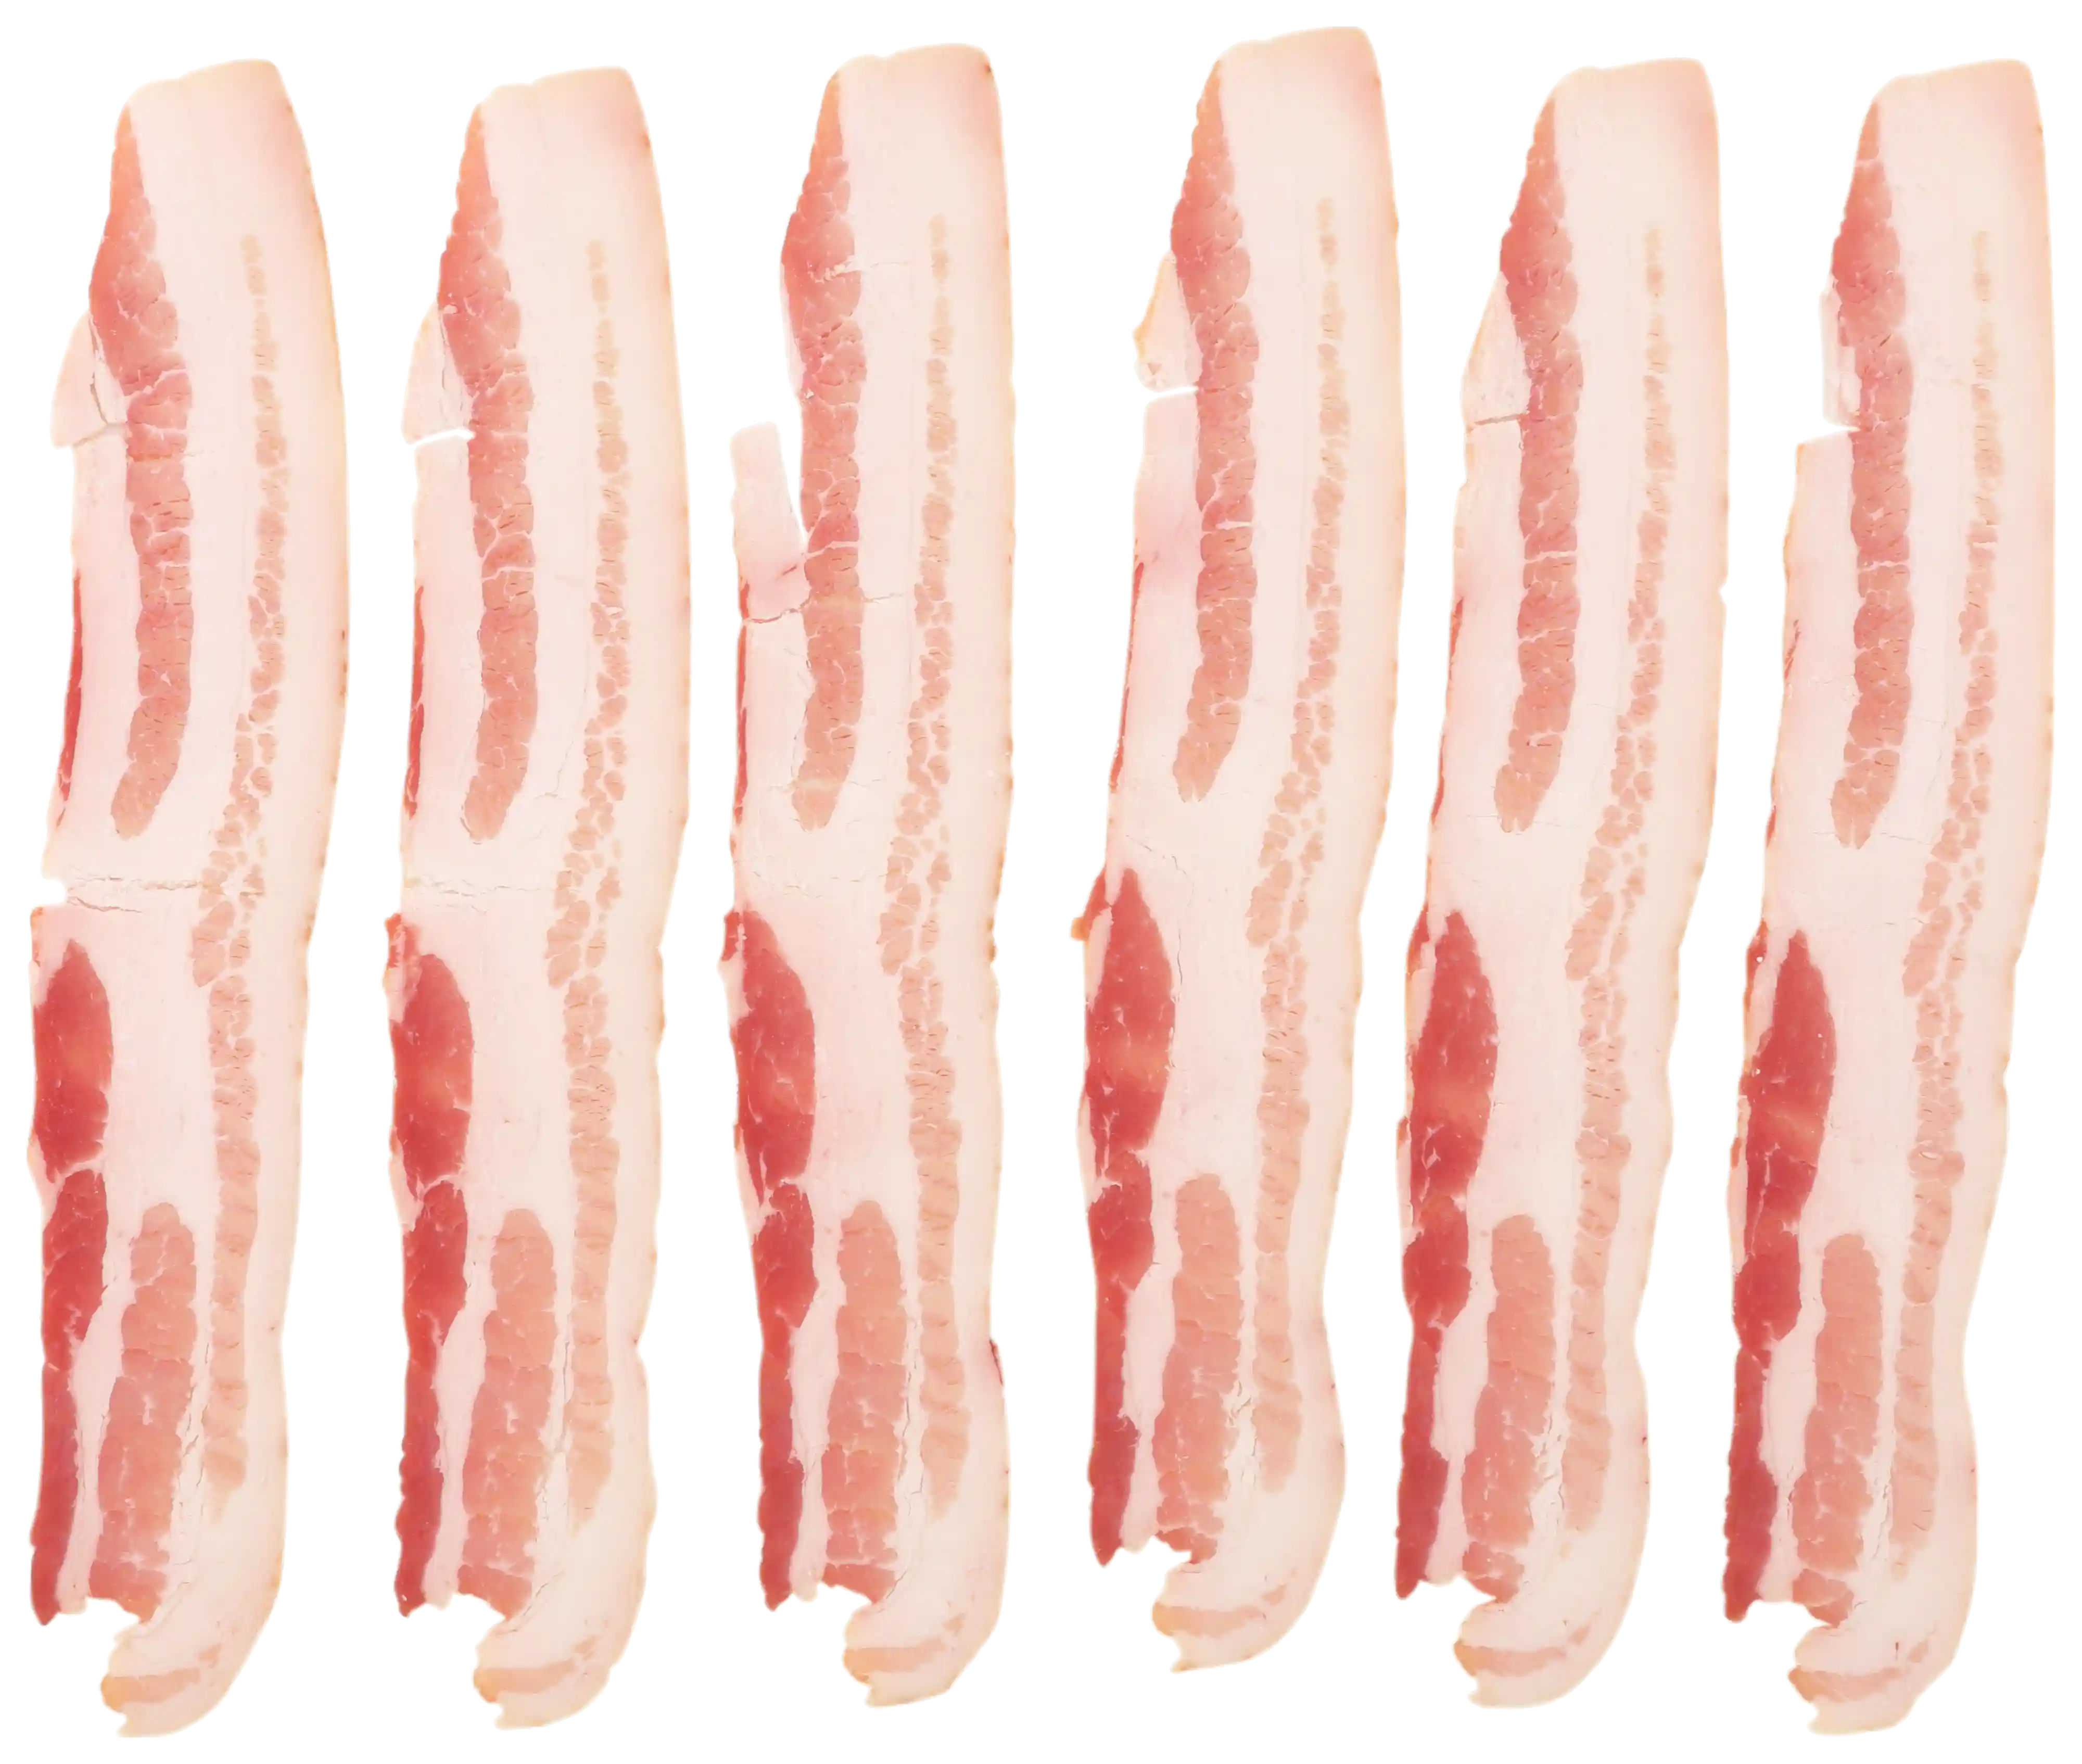 Wright® Brand Naturally Applewood Smoked Thin Sliced Bacon, Bulk, 15 Lbs, 18-22 Slices per Pound, Gas Flushed_image_11